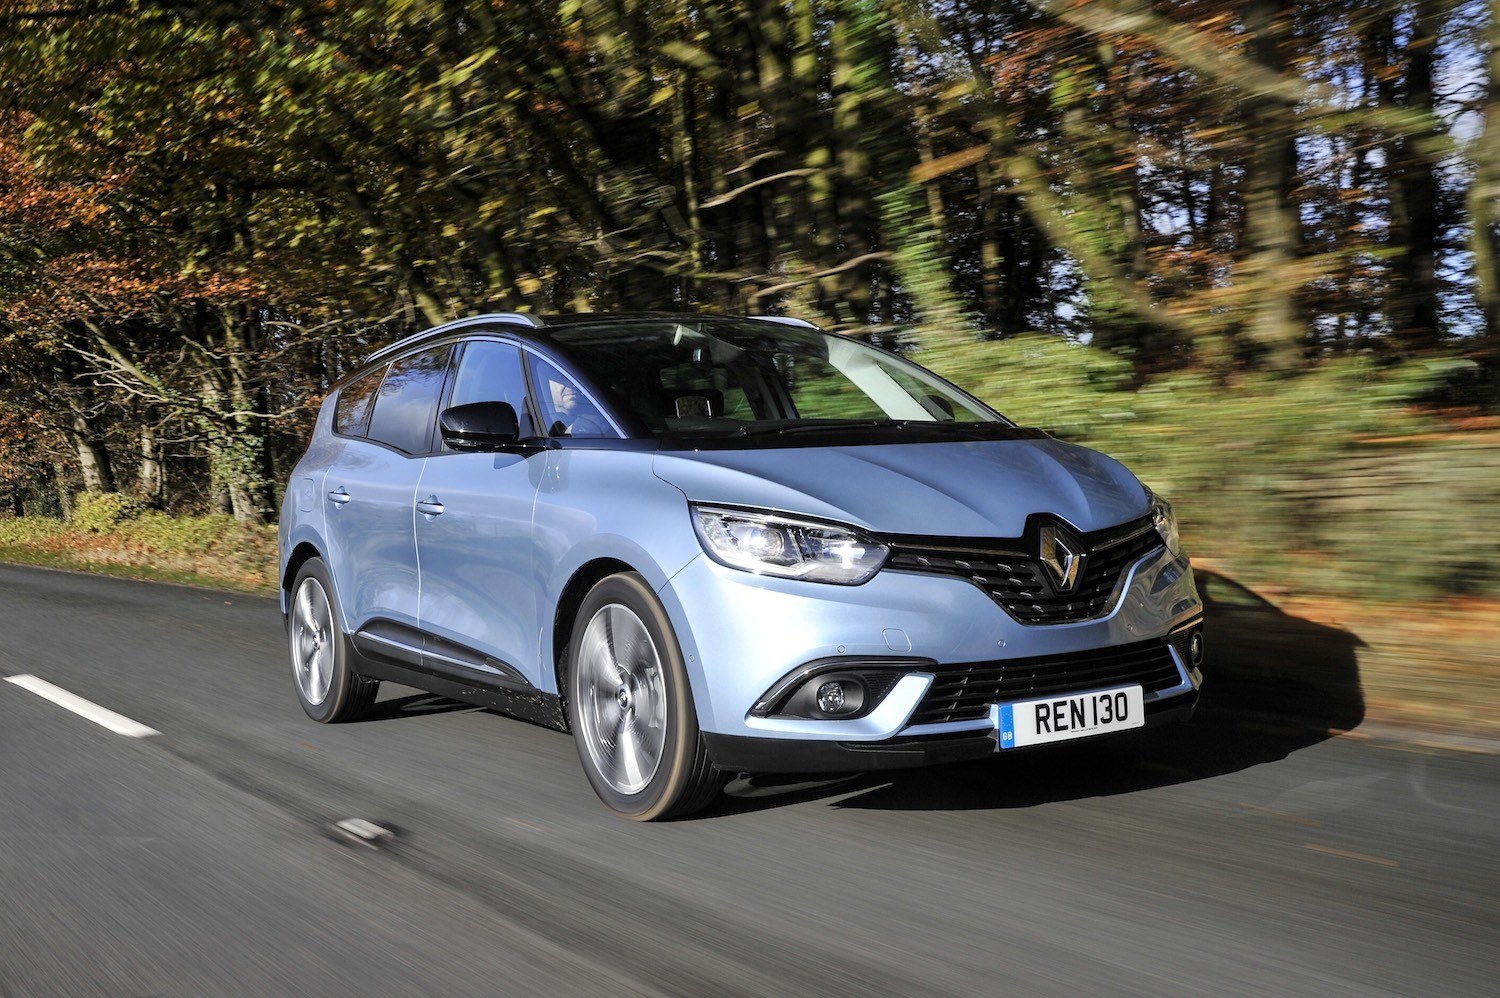 Neil Lyndon reviews the lates Renault Scenic for Drive 18